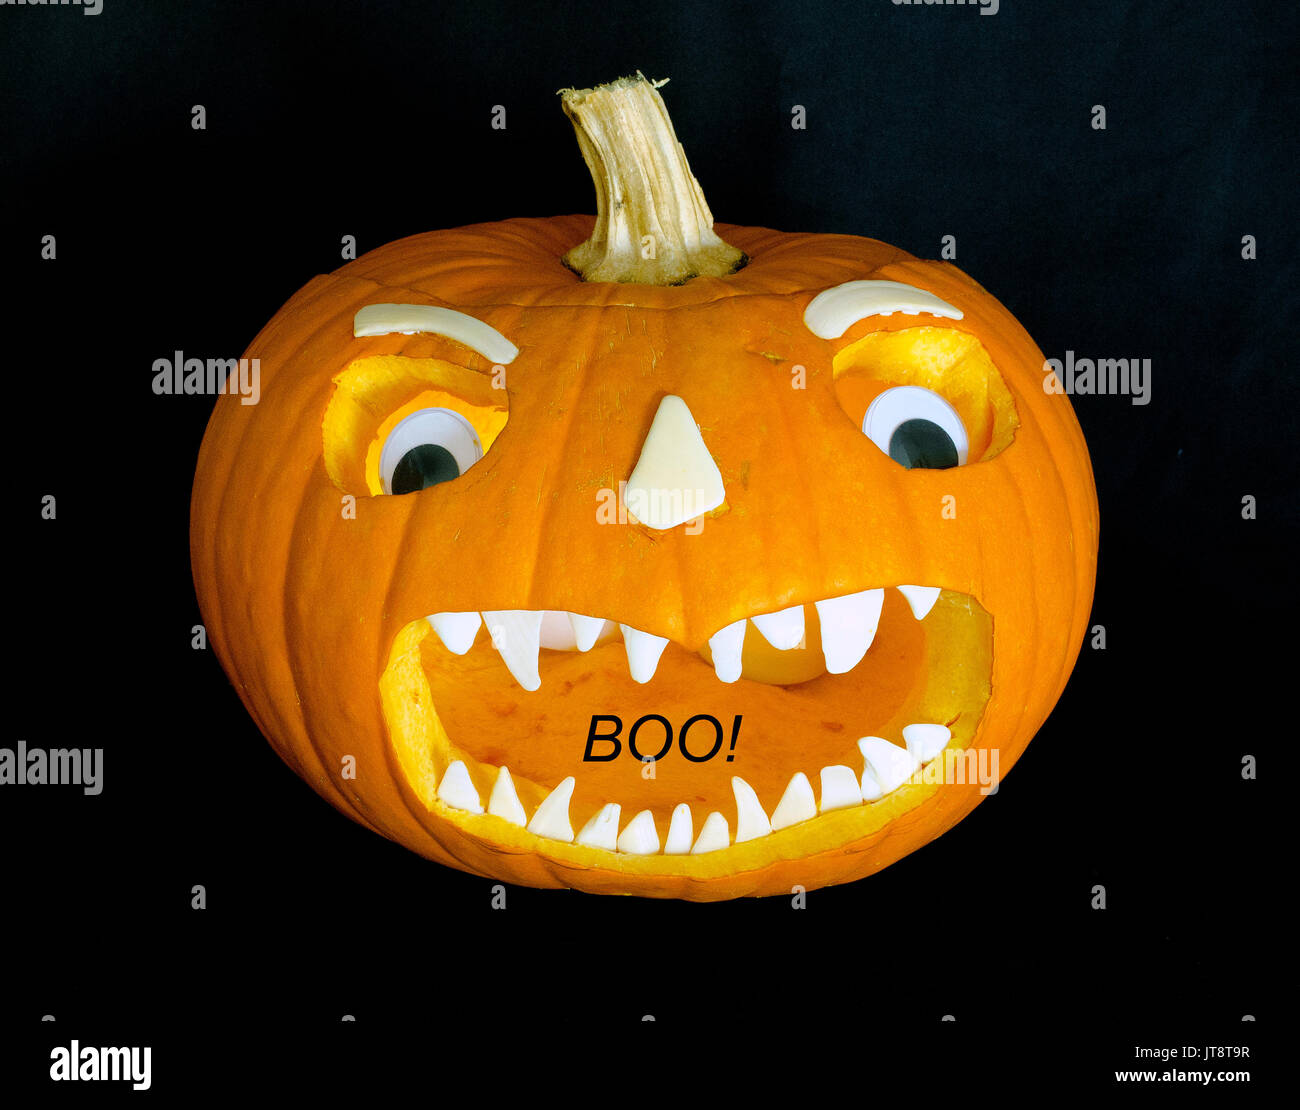 This scary Jack-o'-lantern face that was cut into a hollowed-out orange pumpkin was enhanced with sun-bleached white seashells for teeth, nose and eyebrows, plus a pair of plastic toy eyes. (The black 'BOO!' was added digitally to the image.) Carving jack-o'-lanterns is a tradition for Halloween, which evolved from All Hallows' Eve and continues to be celebrated annually on October 31. Stock Photo